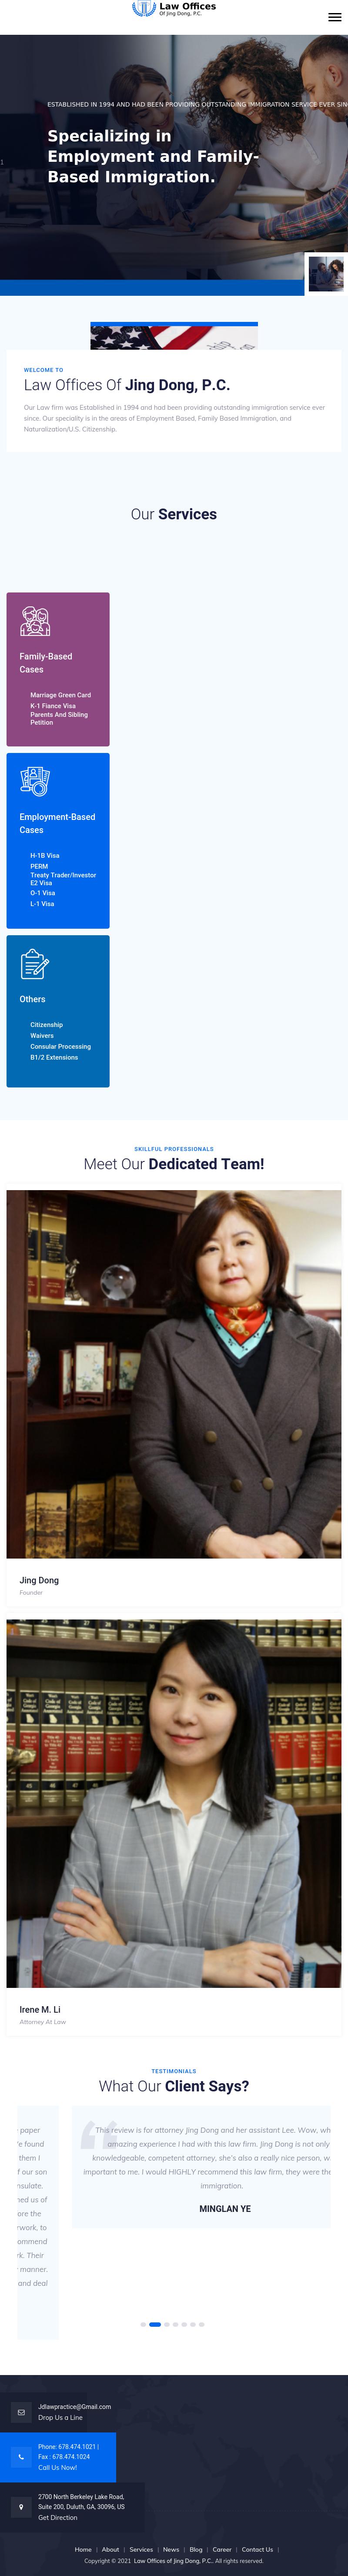 Law offices of Jing Dong, P.C. - Duluth GA Lawyers